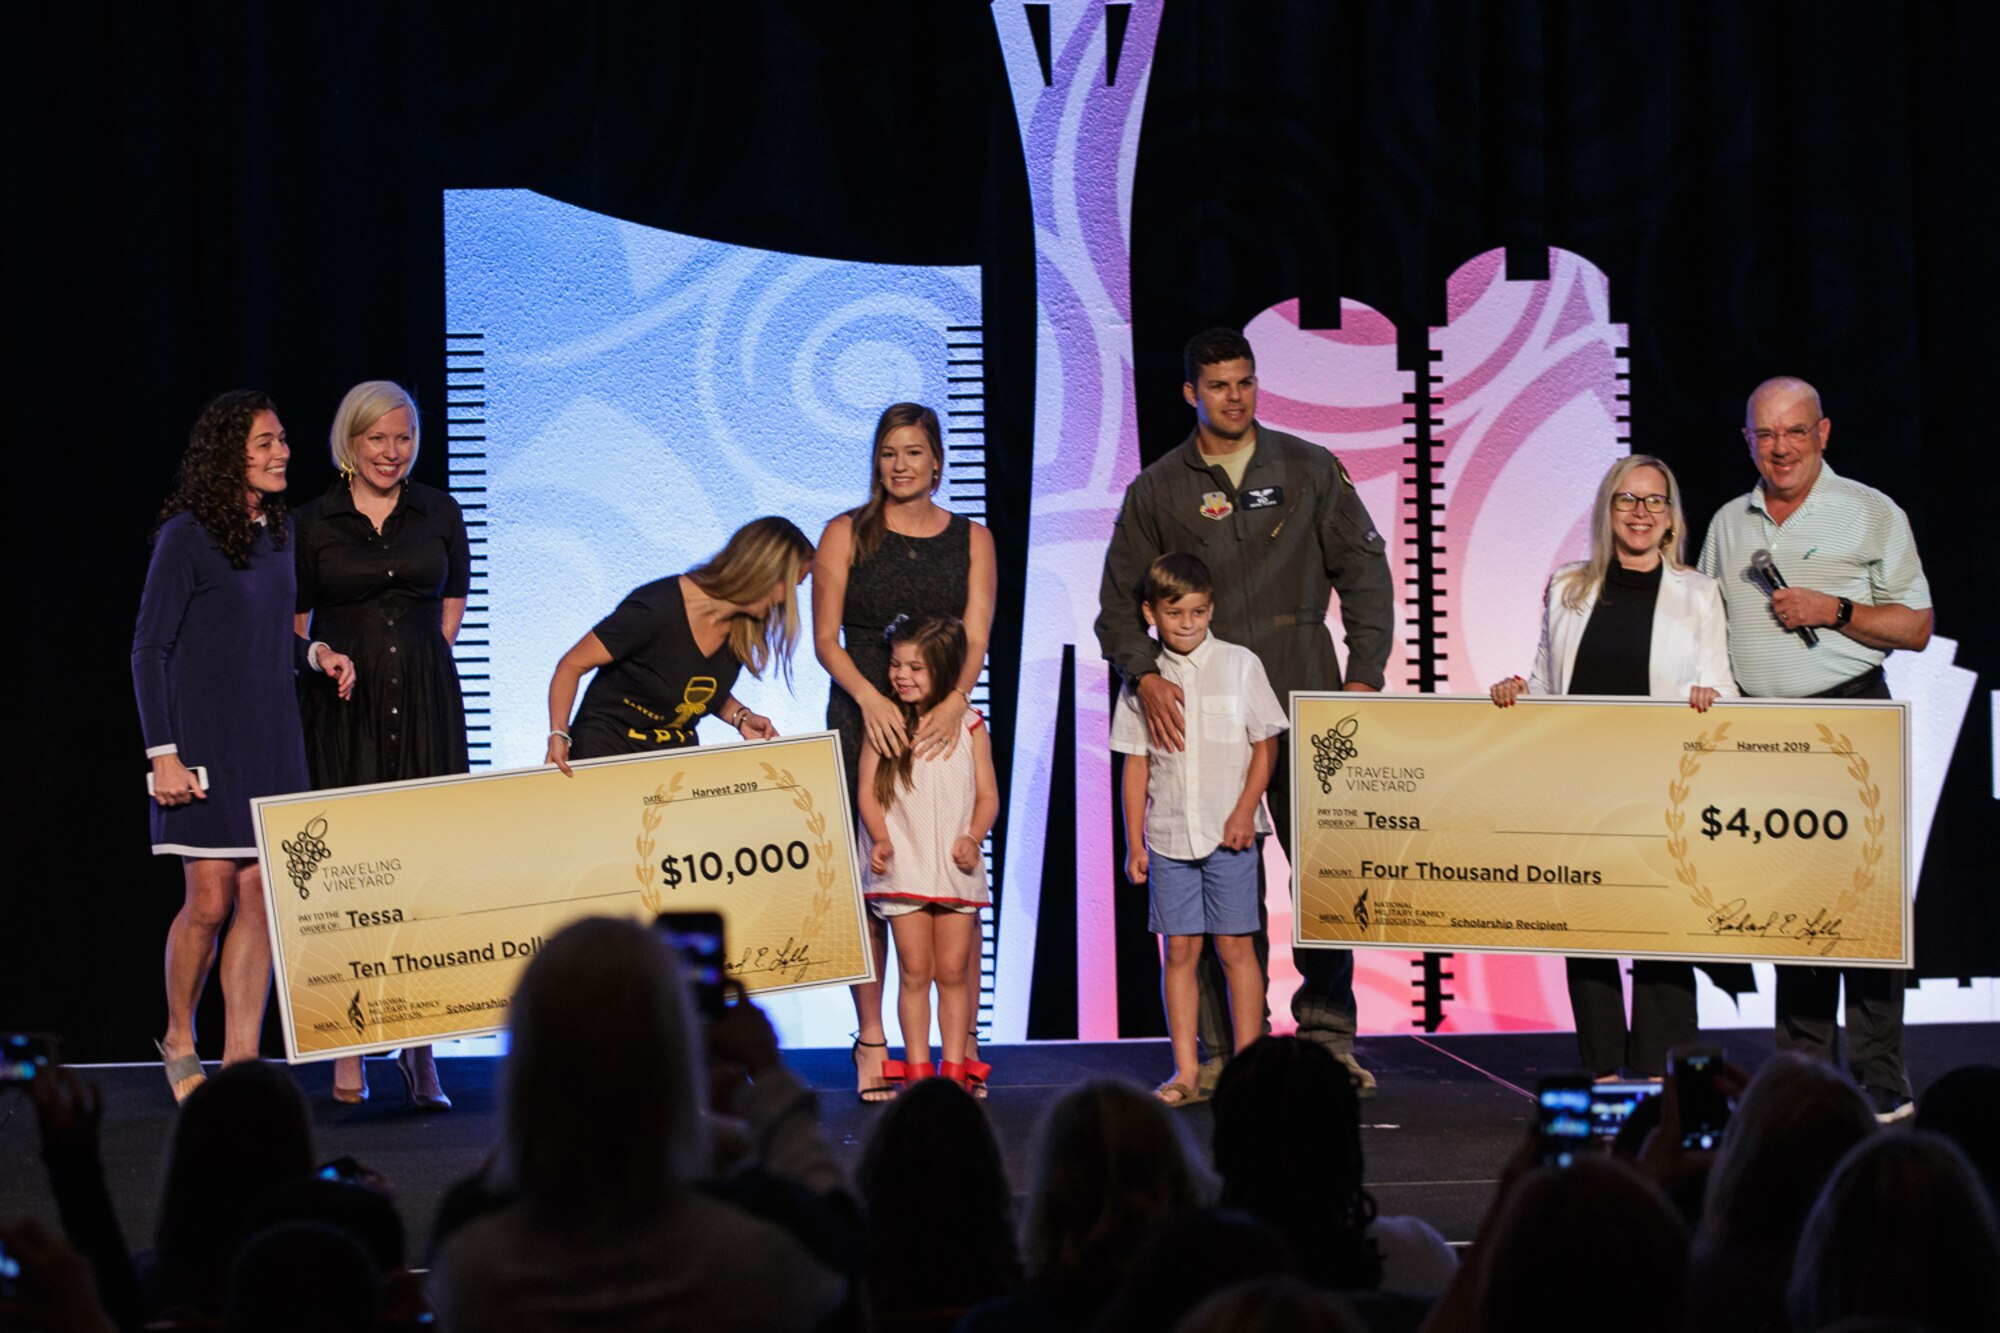 Tessa, key spouse for the 42nd Attack Squadron, receives checks covering her Master’s Degree in Caesar’s Palace, at Las Vegas, Nevada, July 20, 2019.  Tessa teaches second graders at Betsy A. Rhodes Elementary School. (Courtesy photo by: Lindsey Miller)